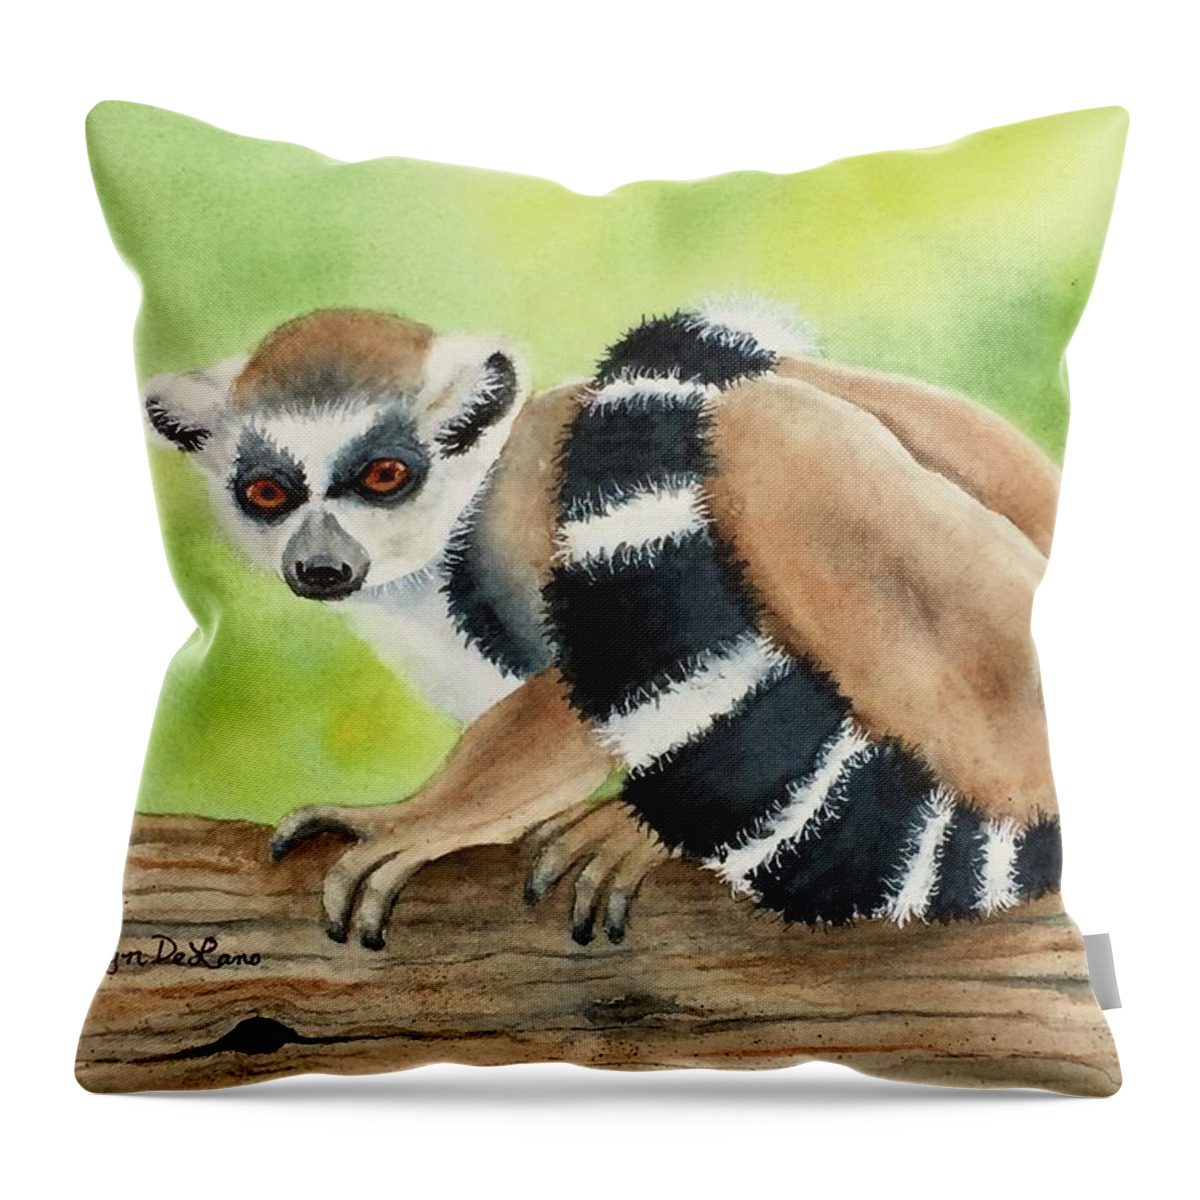 Lemur Throw Pillow featuring the painting Ringtail Lemur by Lyn DeLano